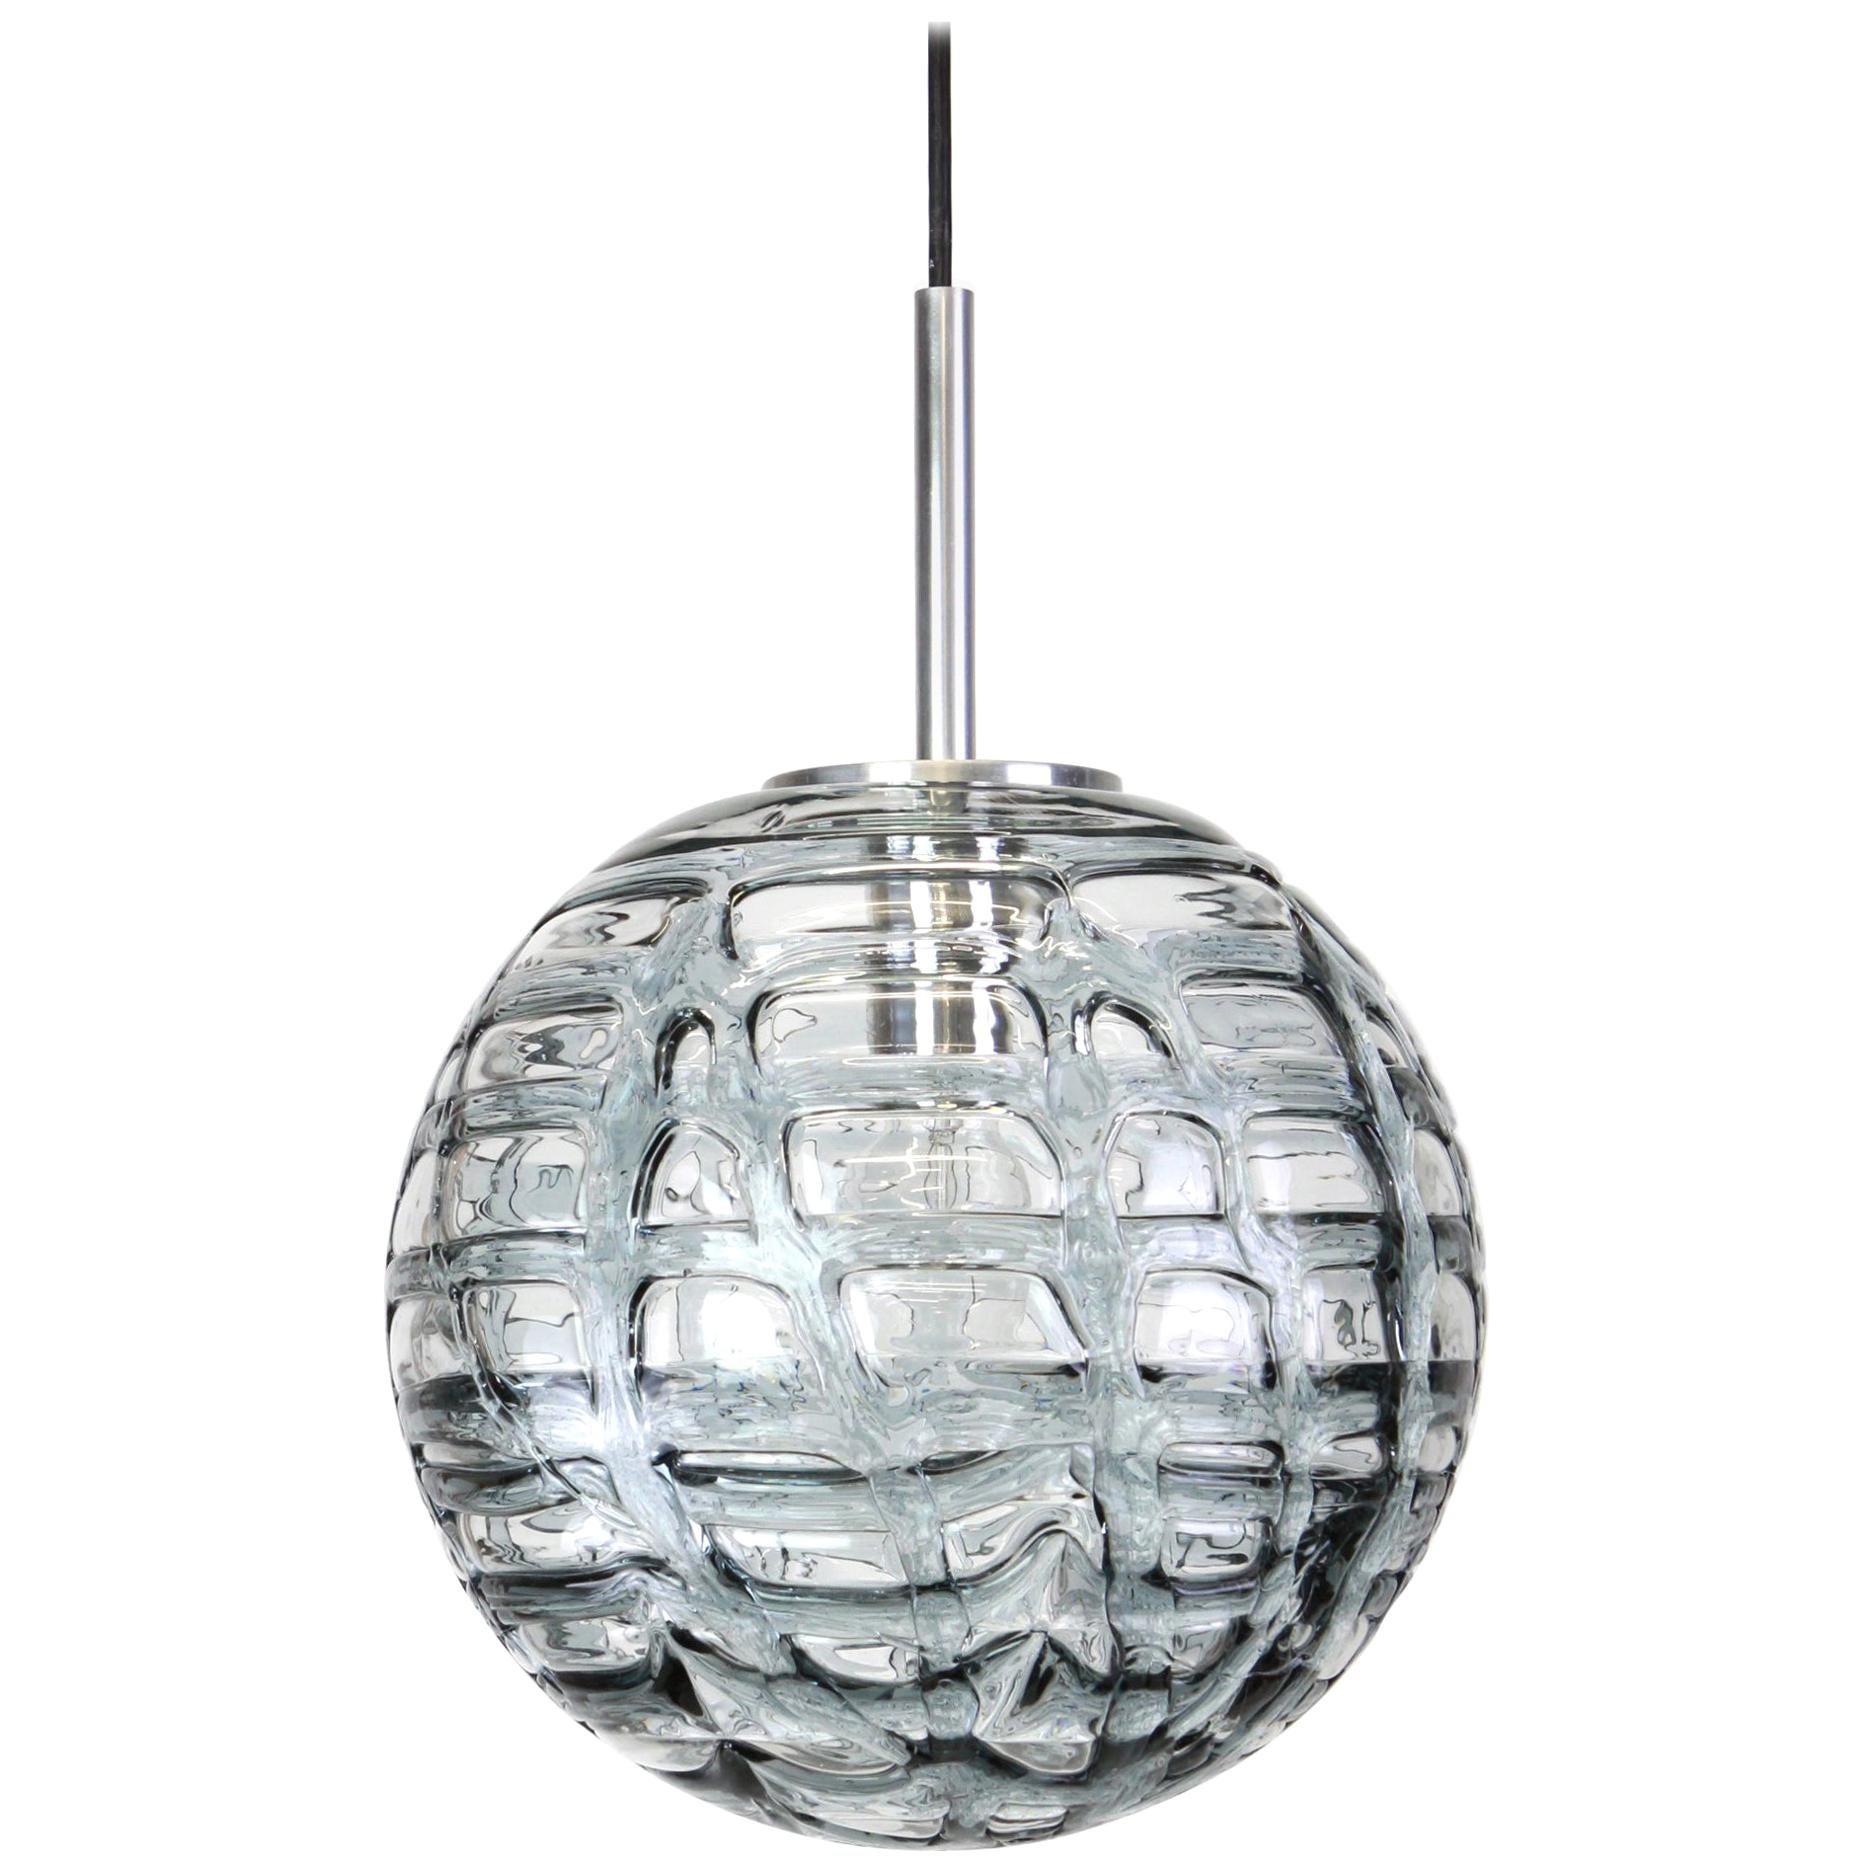 Doria ceiling light with large volcanic Murano glass ball.
High quality of materials - gives a wonderful light effect when it is on.

Sockets: One E27 standard bulbs. Light bulbs are not included. It is possible to install this fixture in all